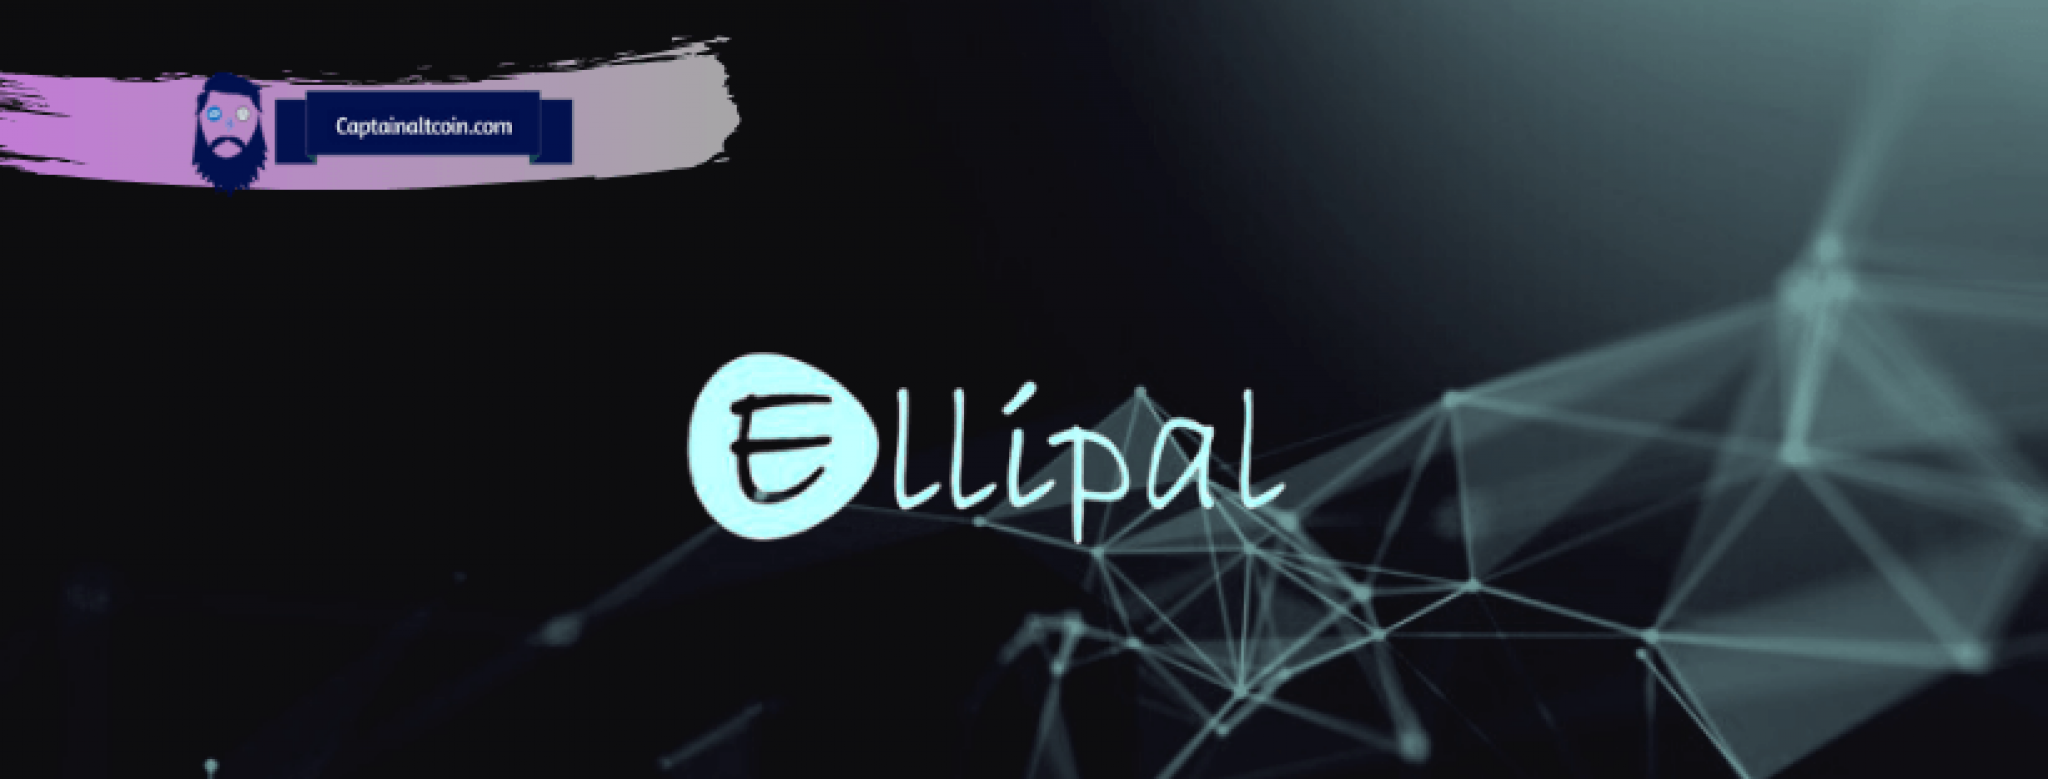 Ellipal Review 2020 - How Legit and Safe Is This Hardware ...